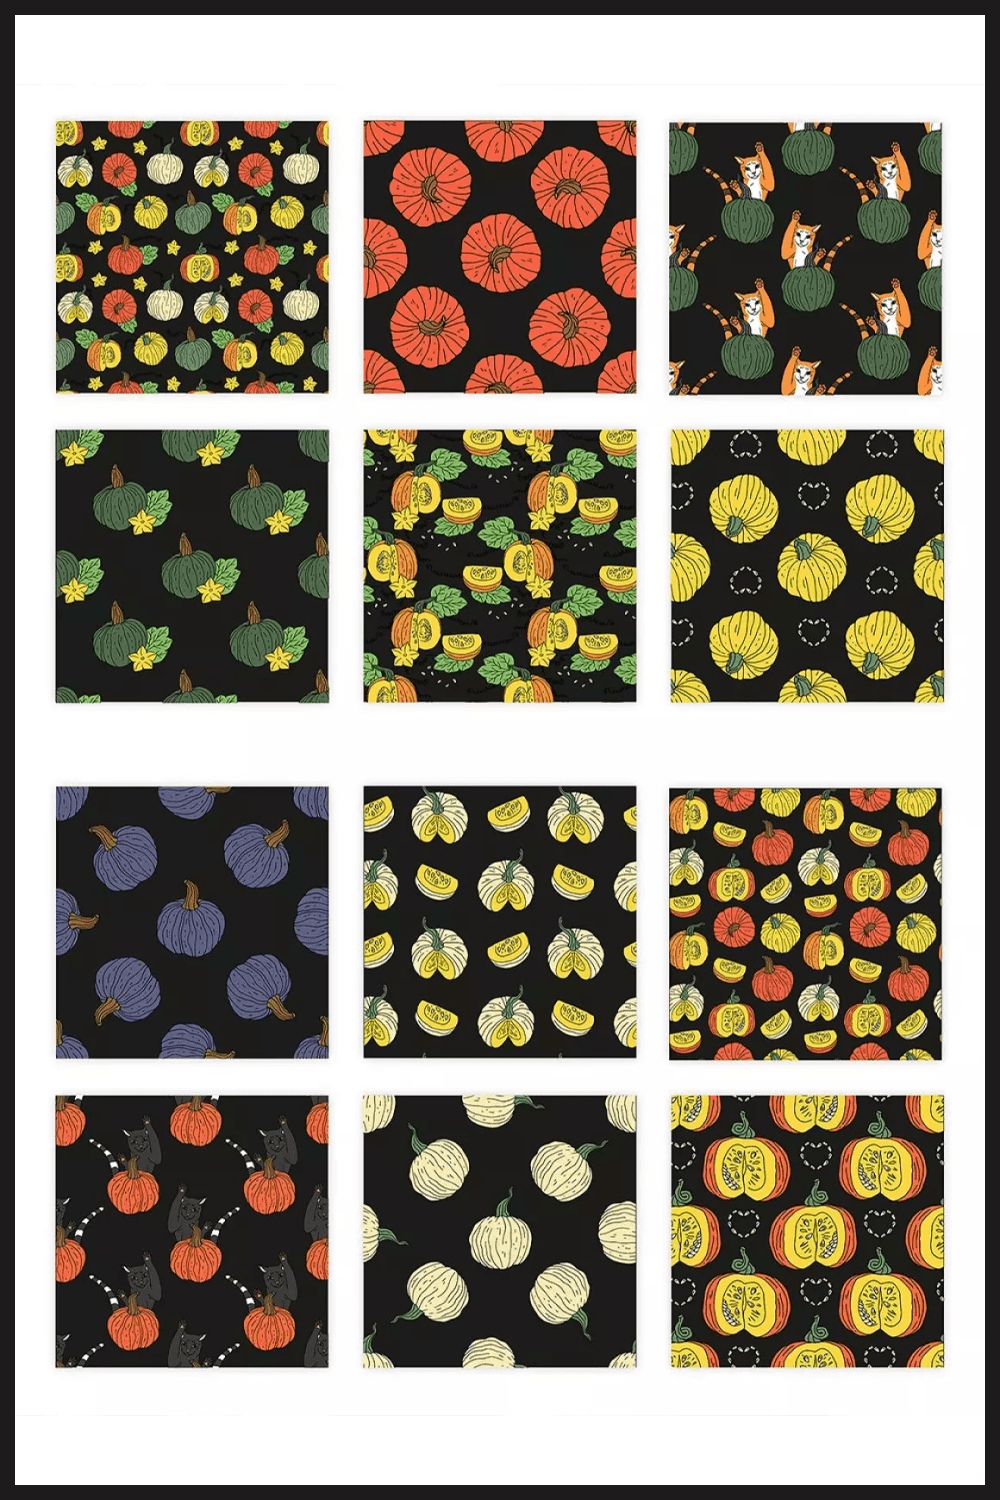 Collage of images of pumpkins of different colors and sizes on a black background.